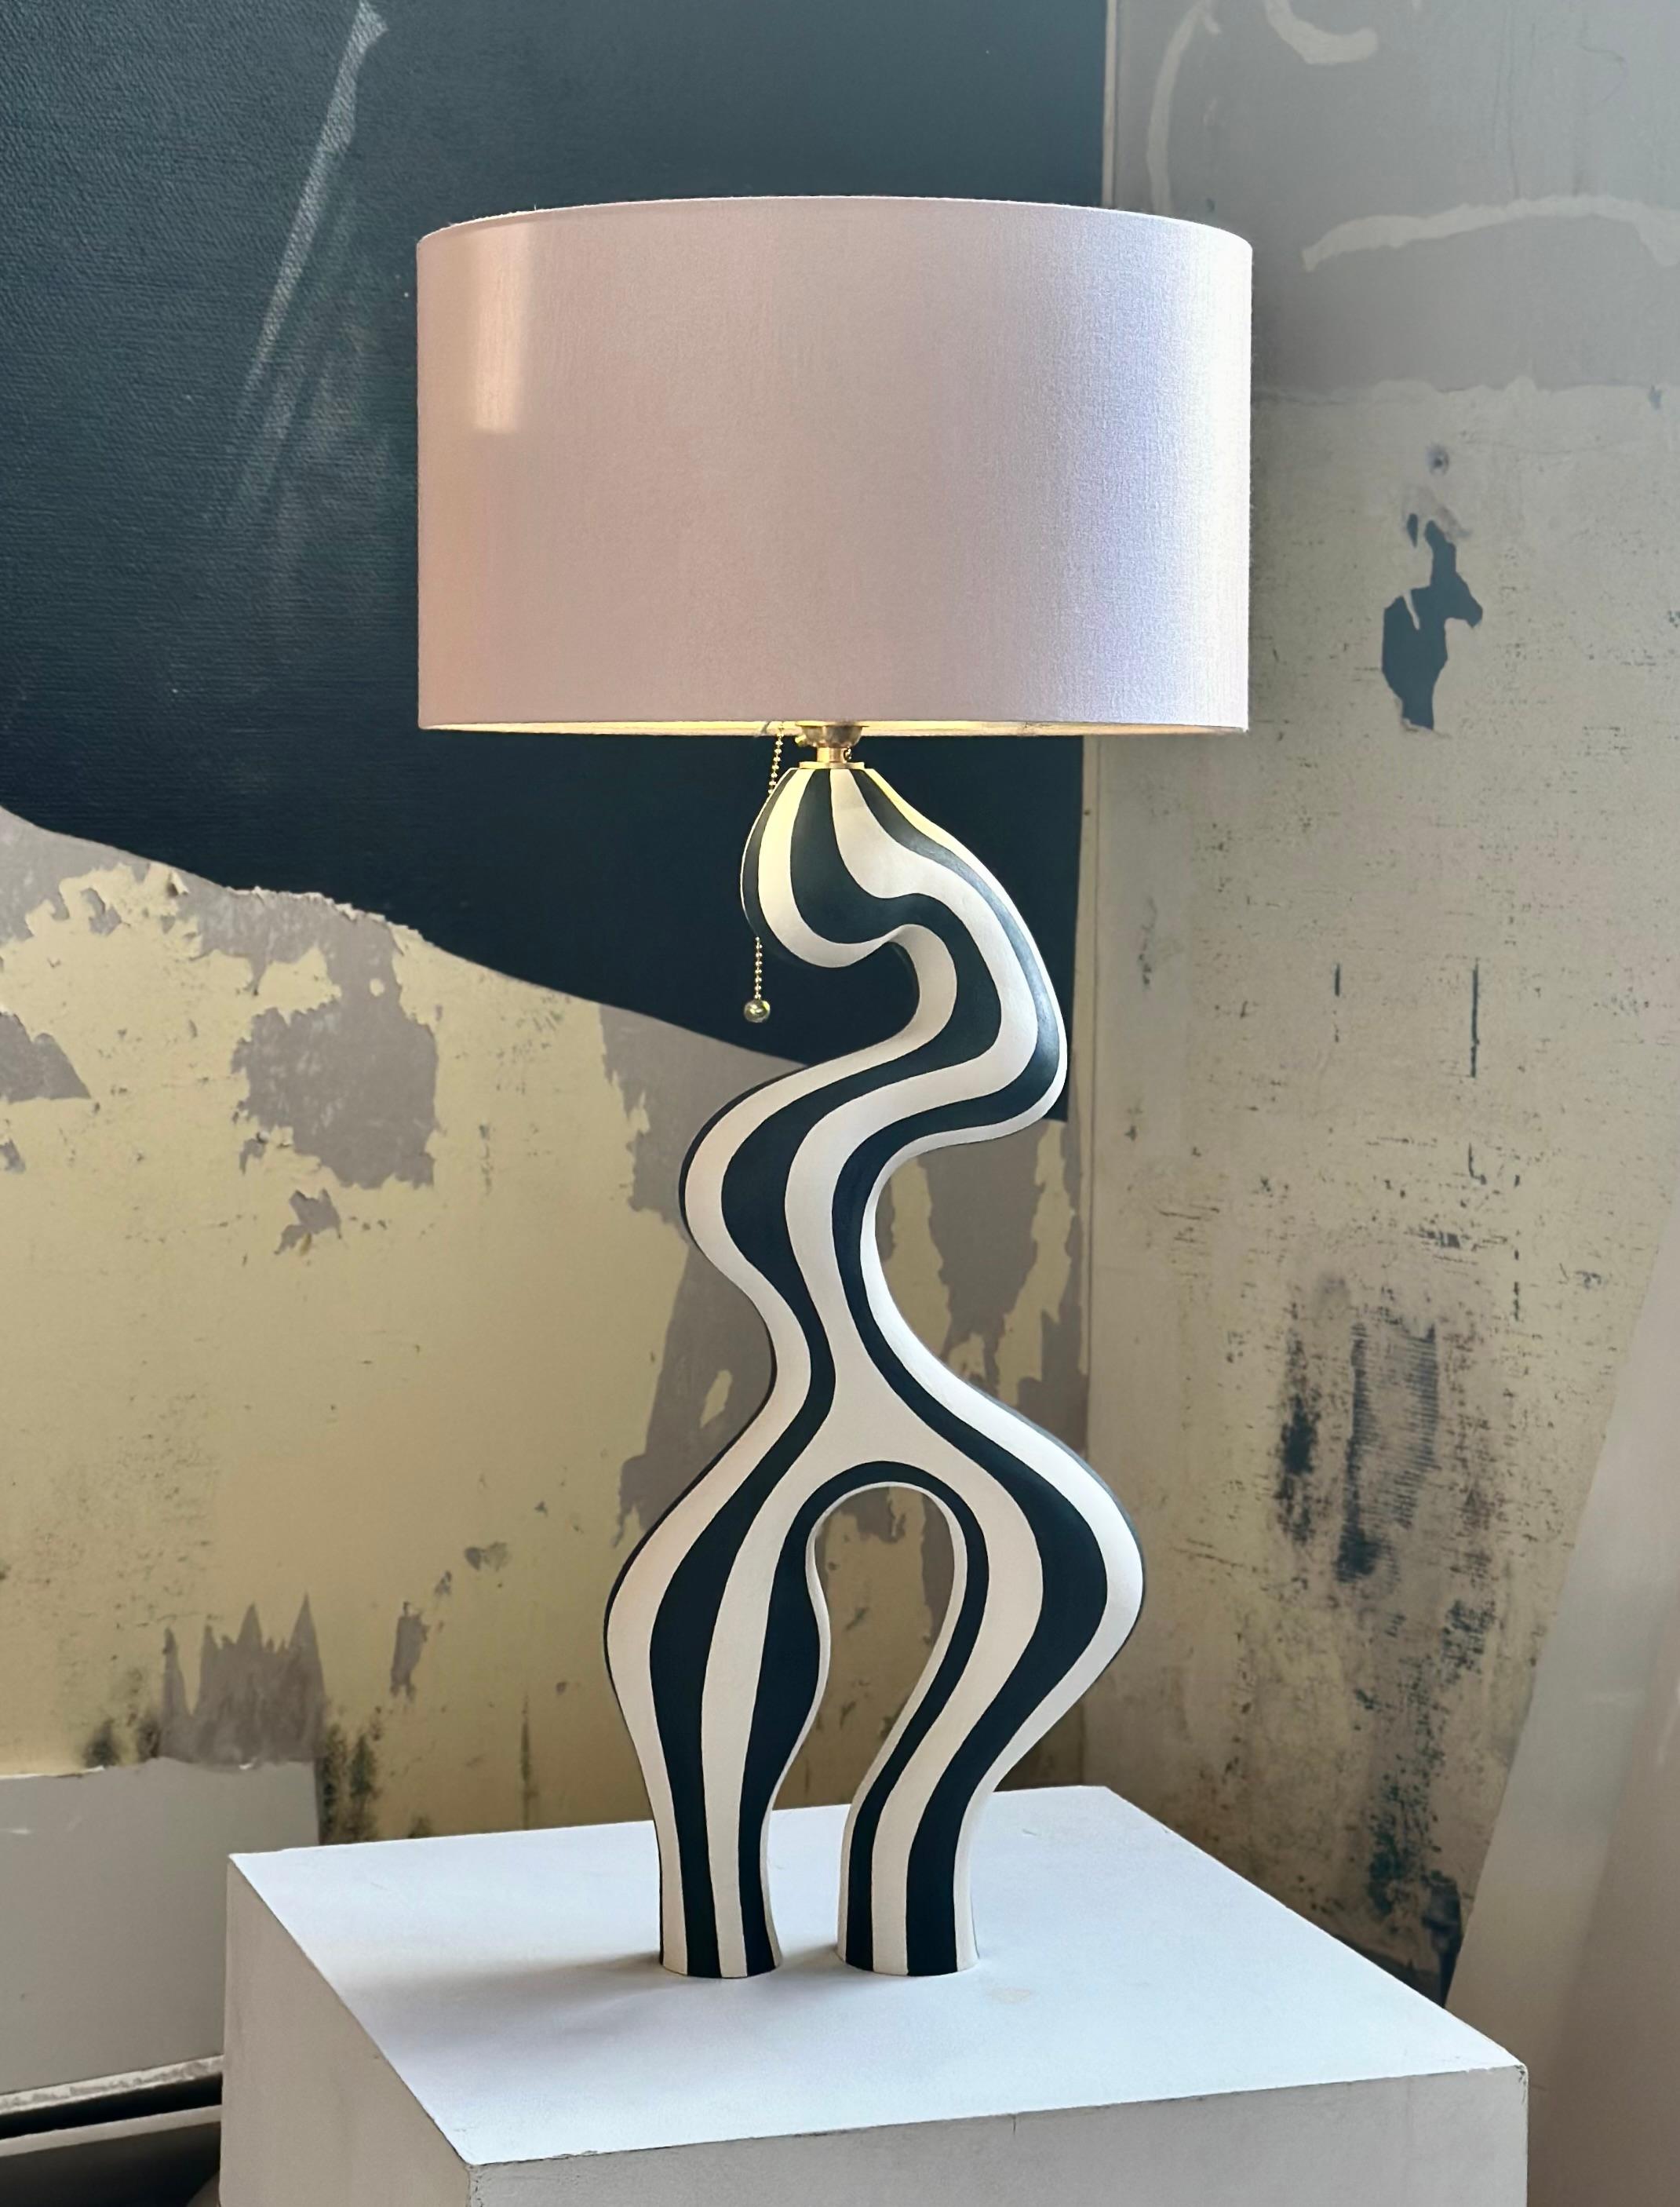 Contemporary Crafted by hand: ceramic table lamp by Norwegian artist Jossolini For Sale